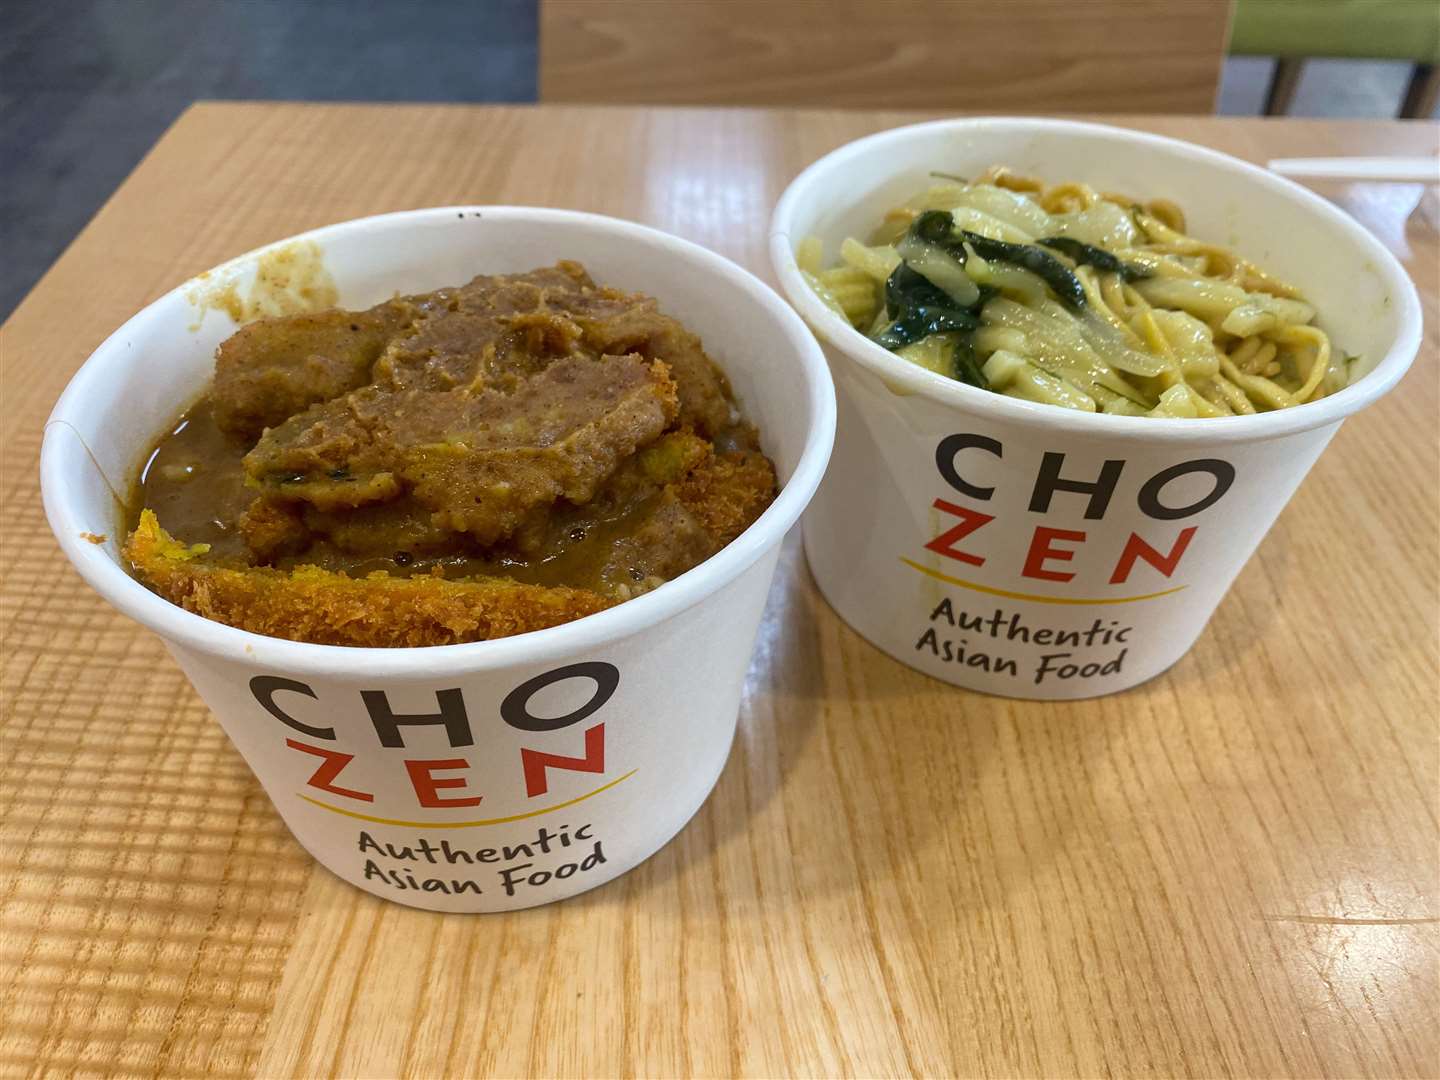 We sampled the Thai green vegetables with noodles and katsu pumpkin with rice from Chozen Noodles. Picture: Sam Lawrie